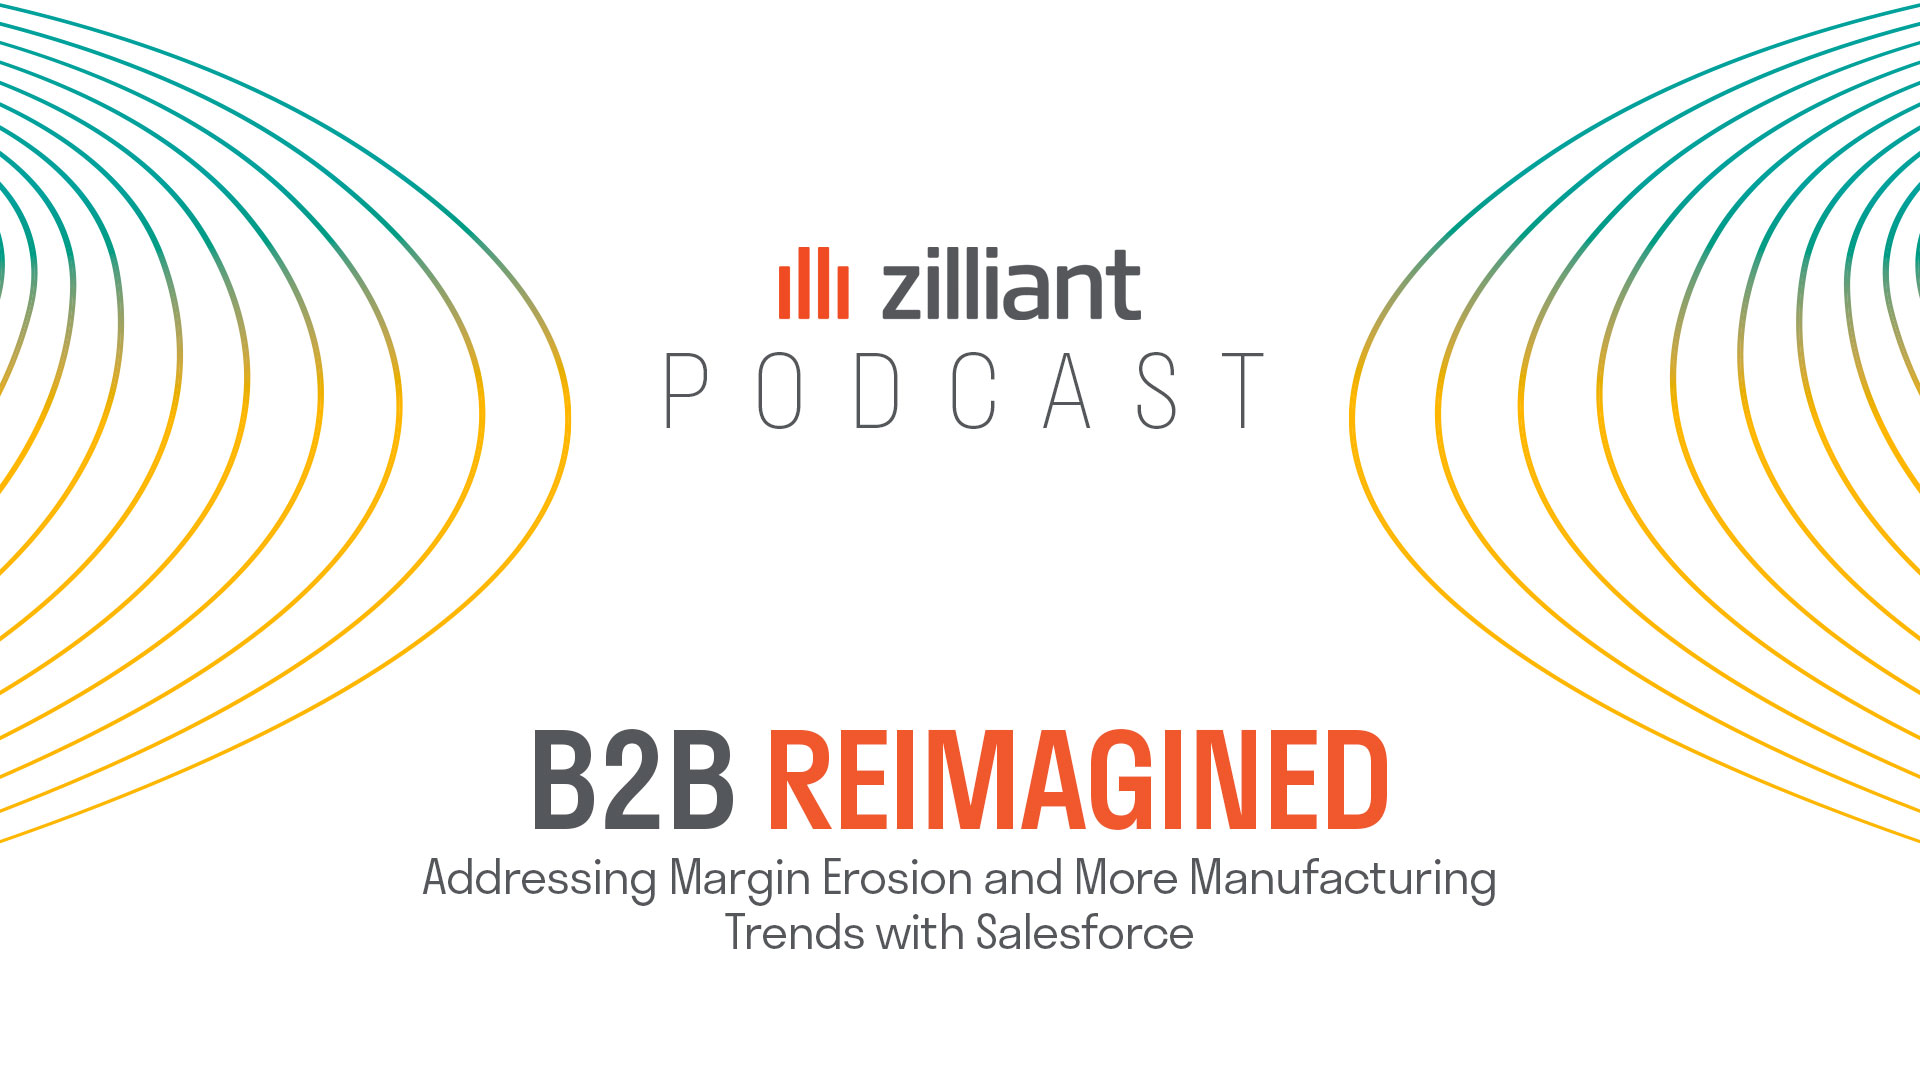 Addressing Margin Erosion and More Manufacturing Trends w/ Salesforce